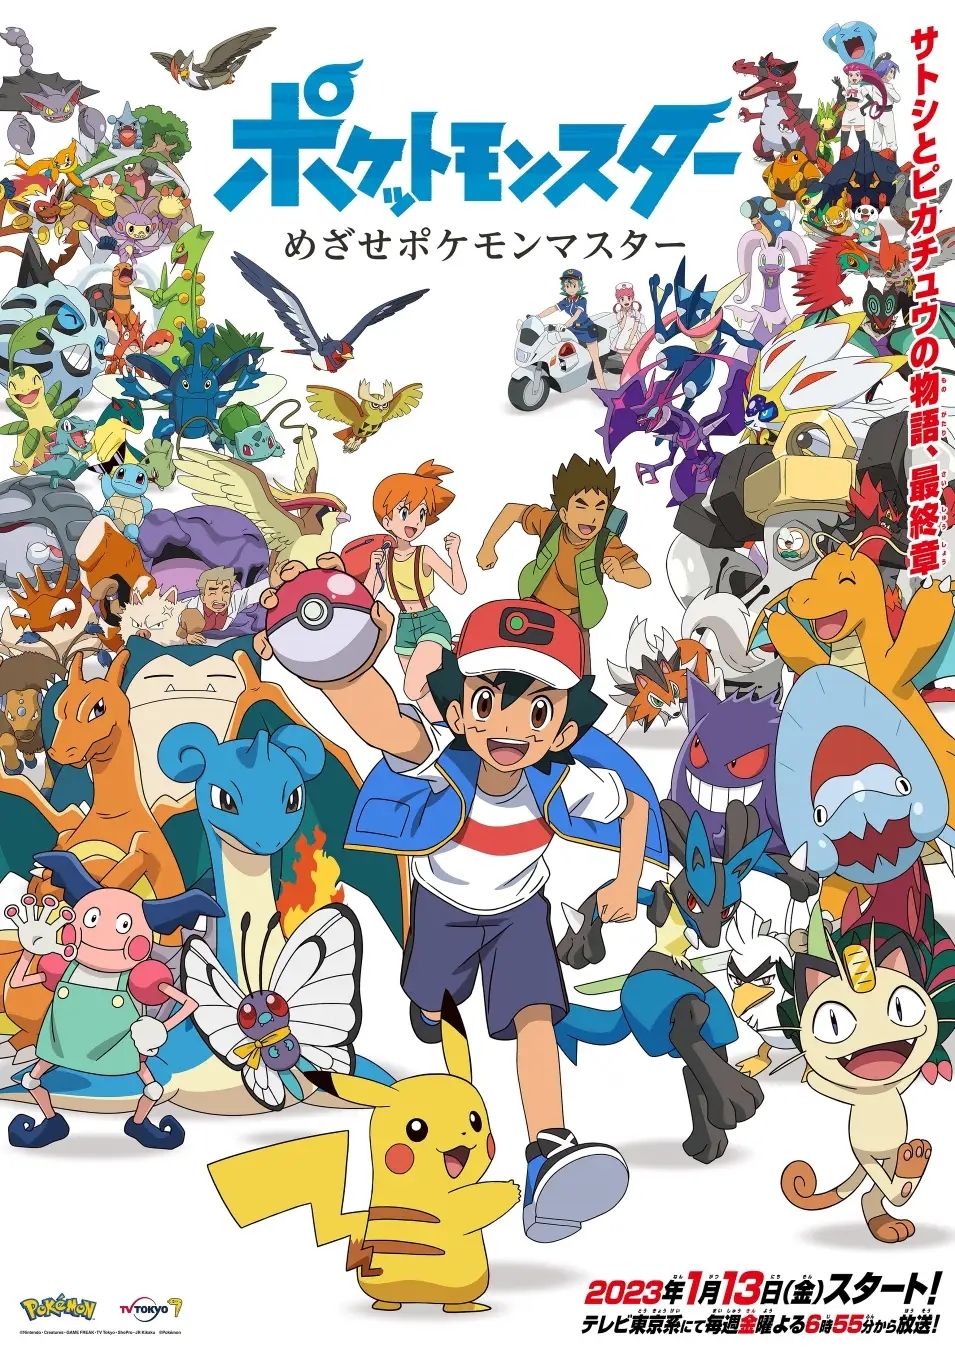 Poster for Pocket Monsters: Aim to be a Pokémon Master